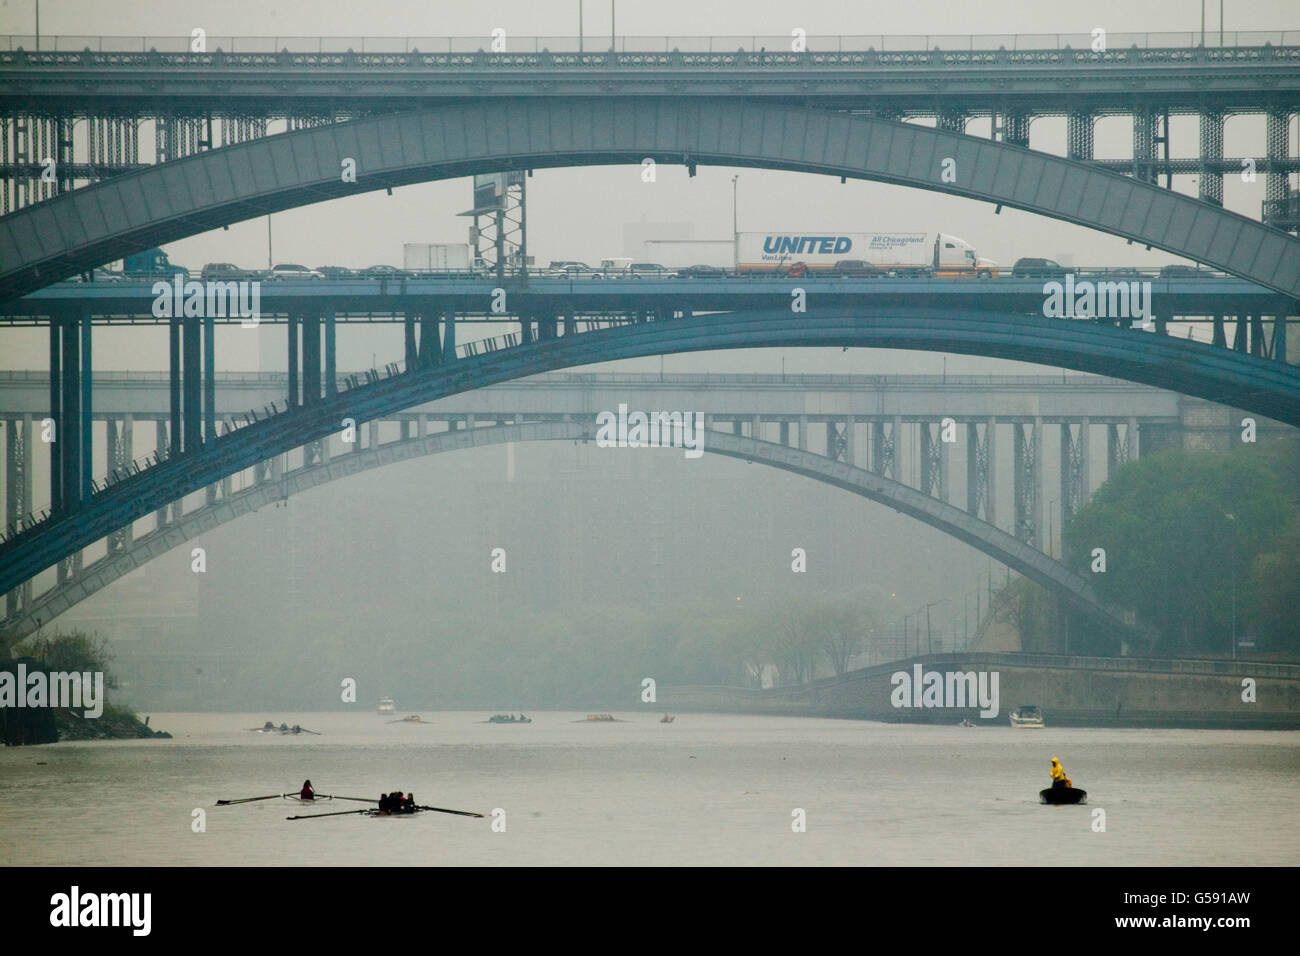 A referee's boat (R) follows two boats racing in the NYRA Scholastic Invitational regatta on the Harlem River in New York City, Stock Photo